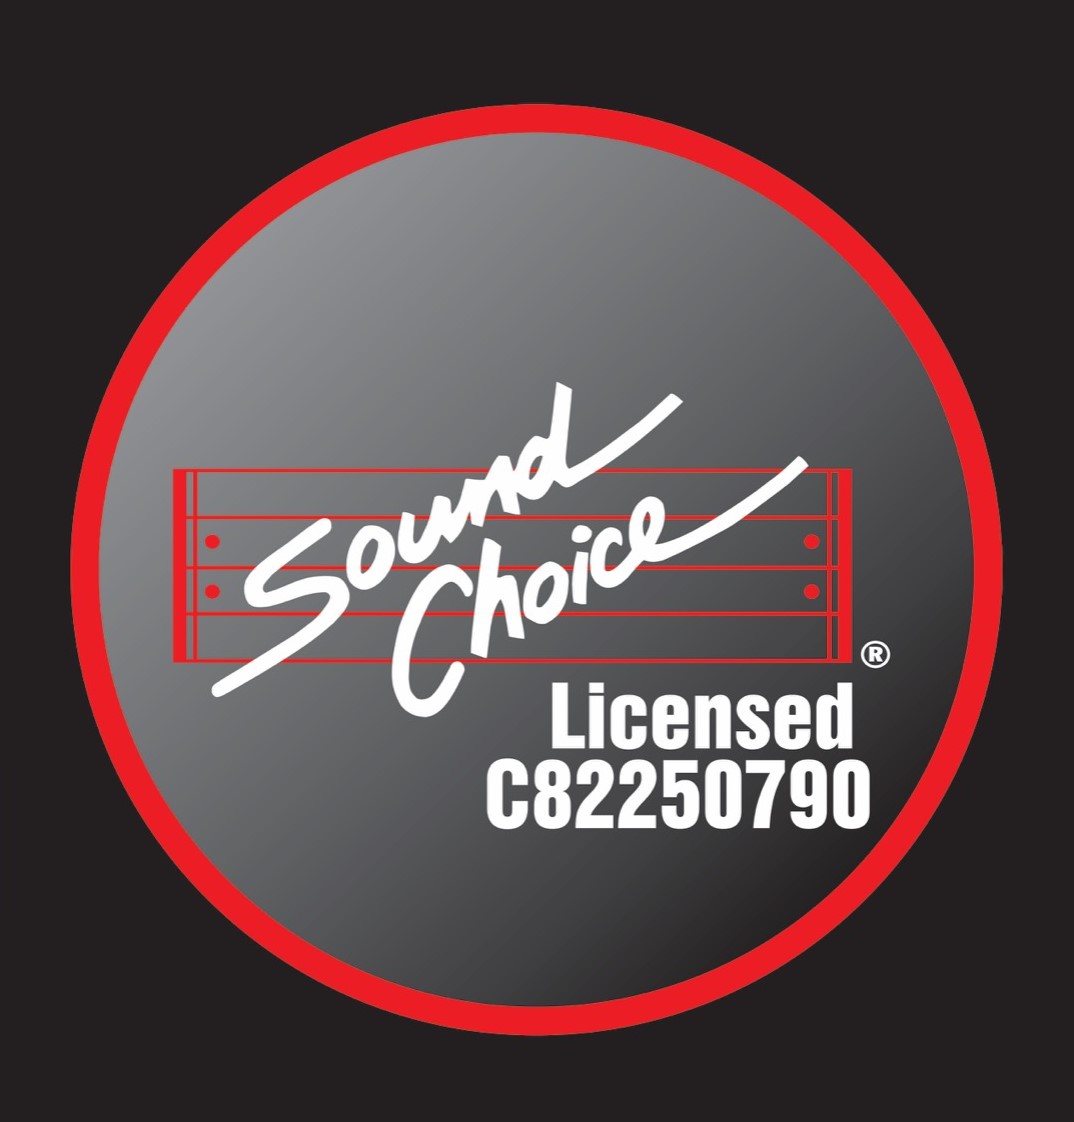 We are SoundChoice certified!